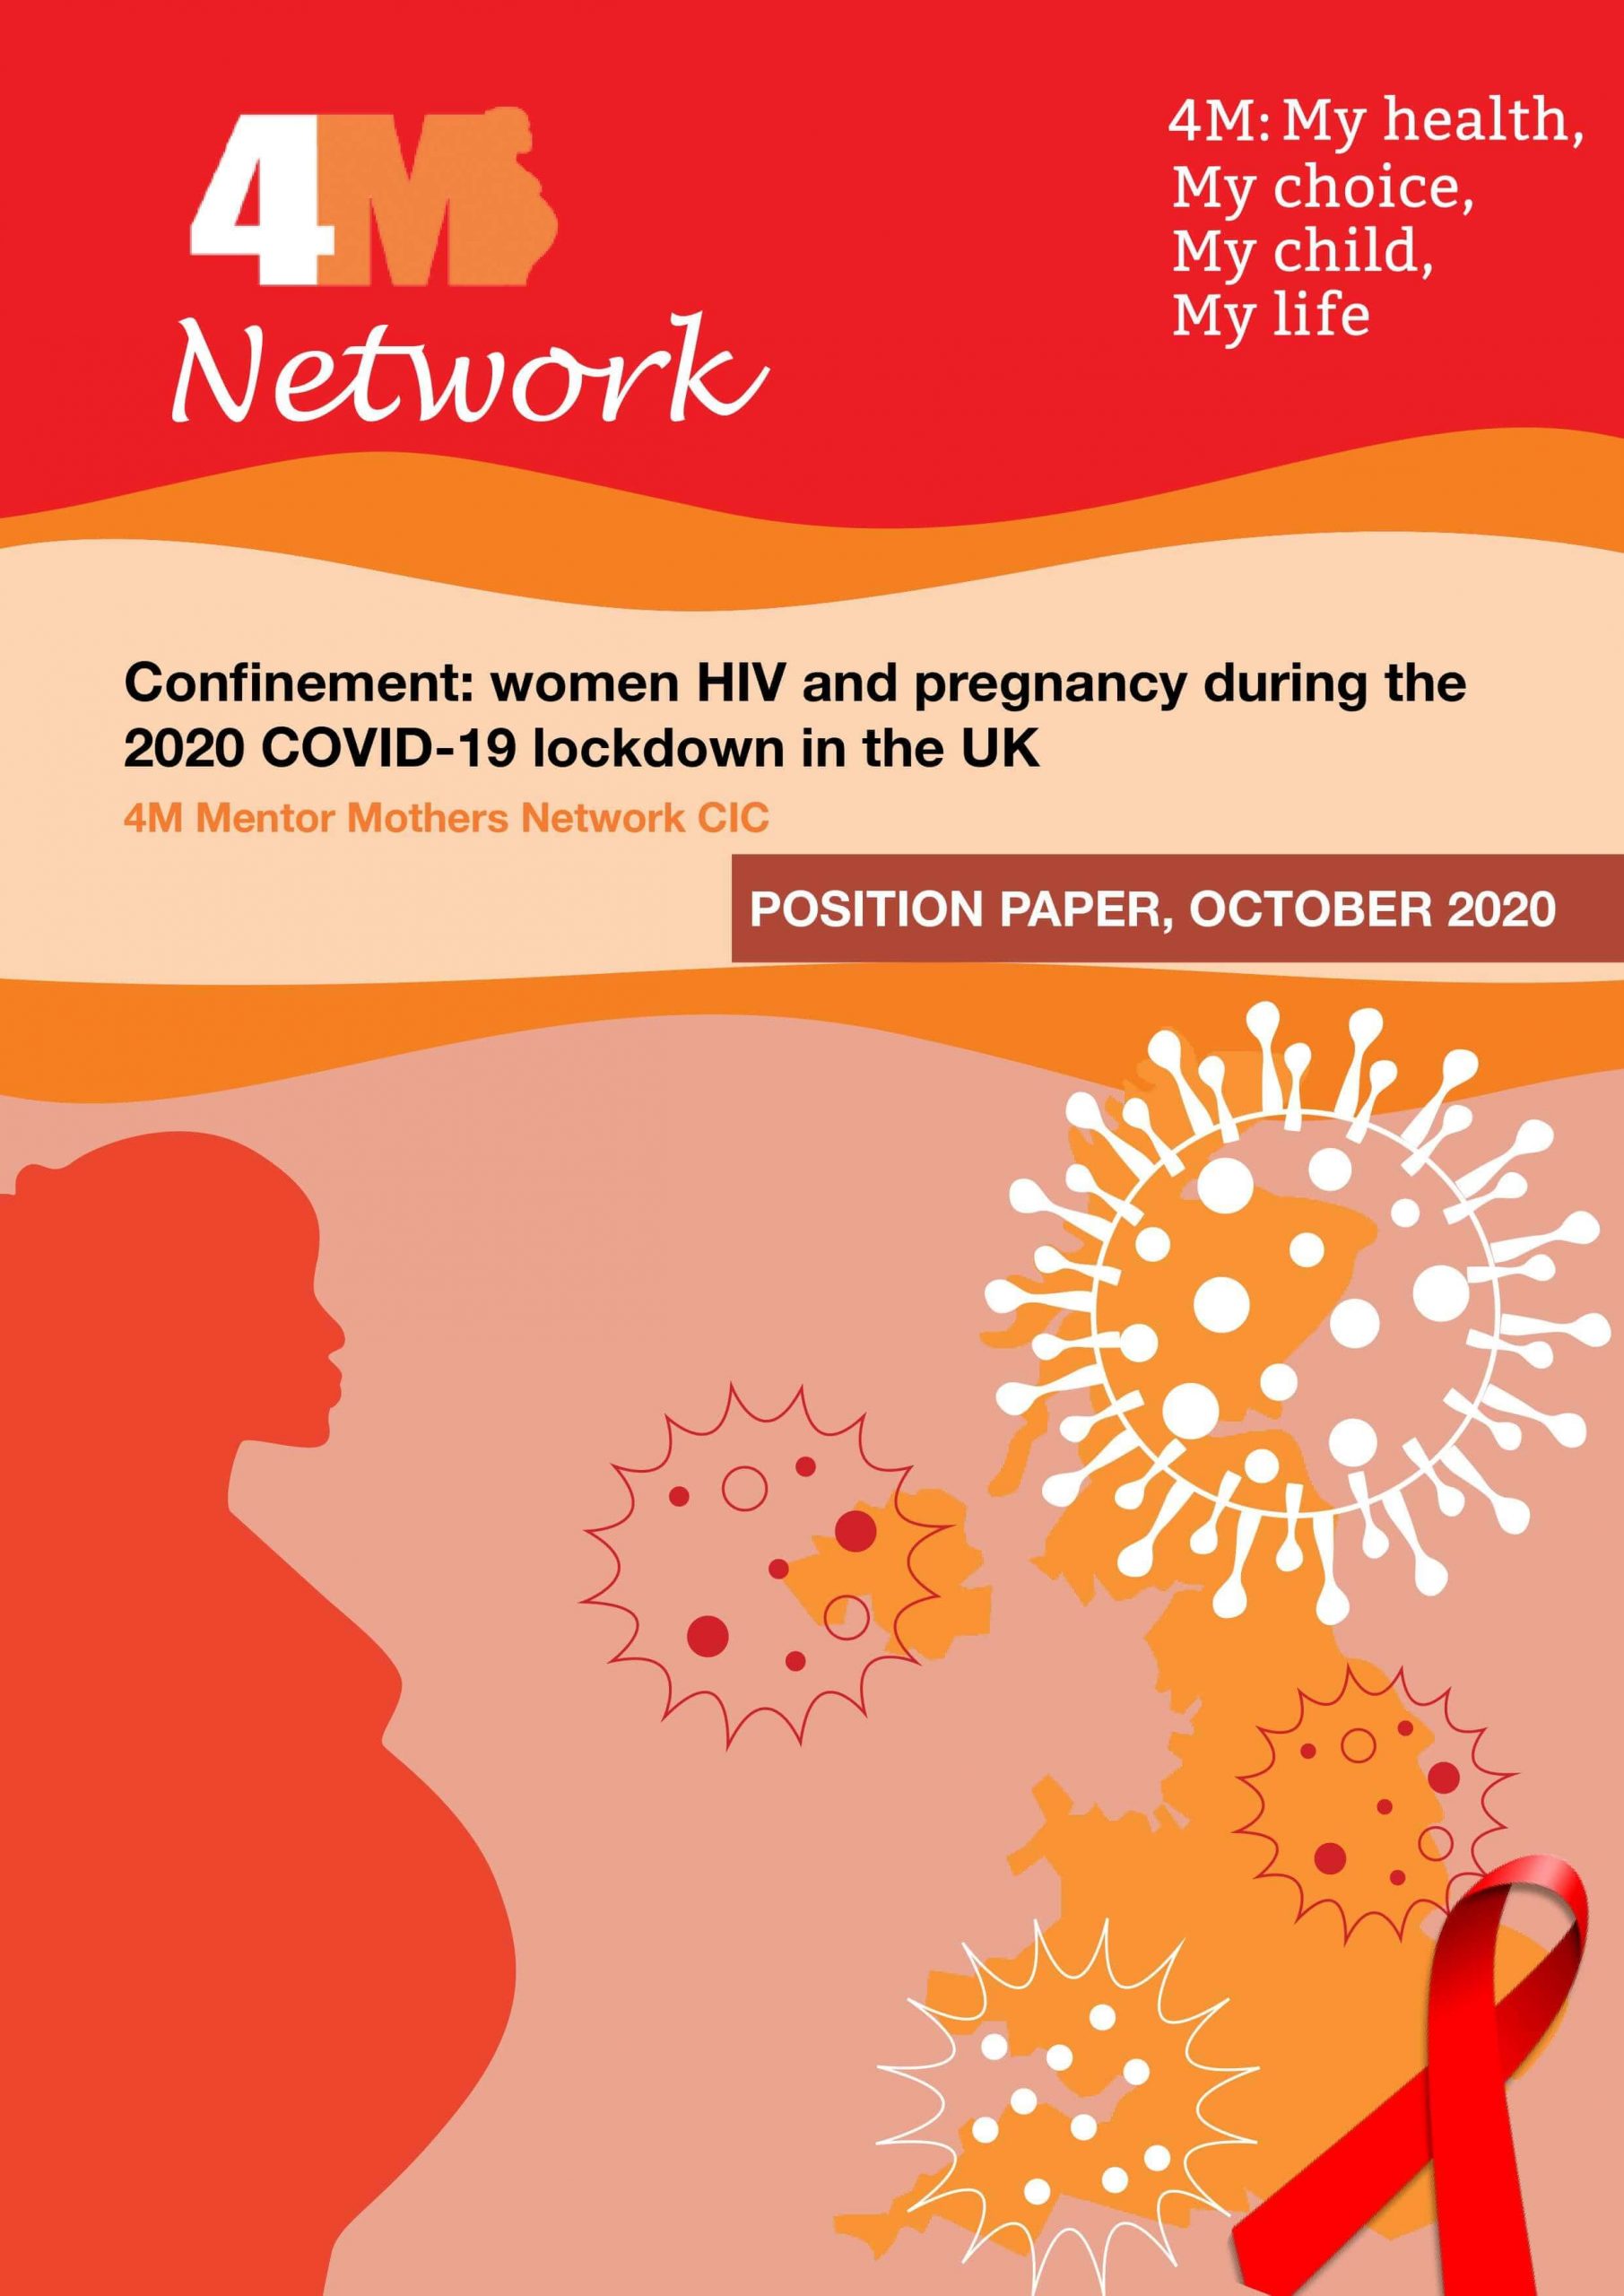 Confinement: Women, HIV, and pregnancy during the COVID-19 lockdown in the UK